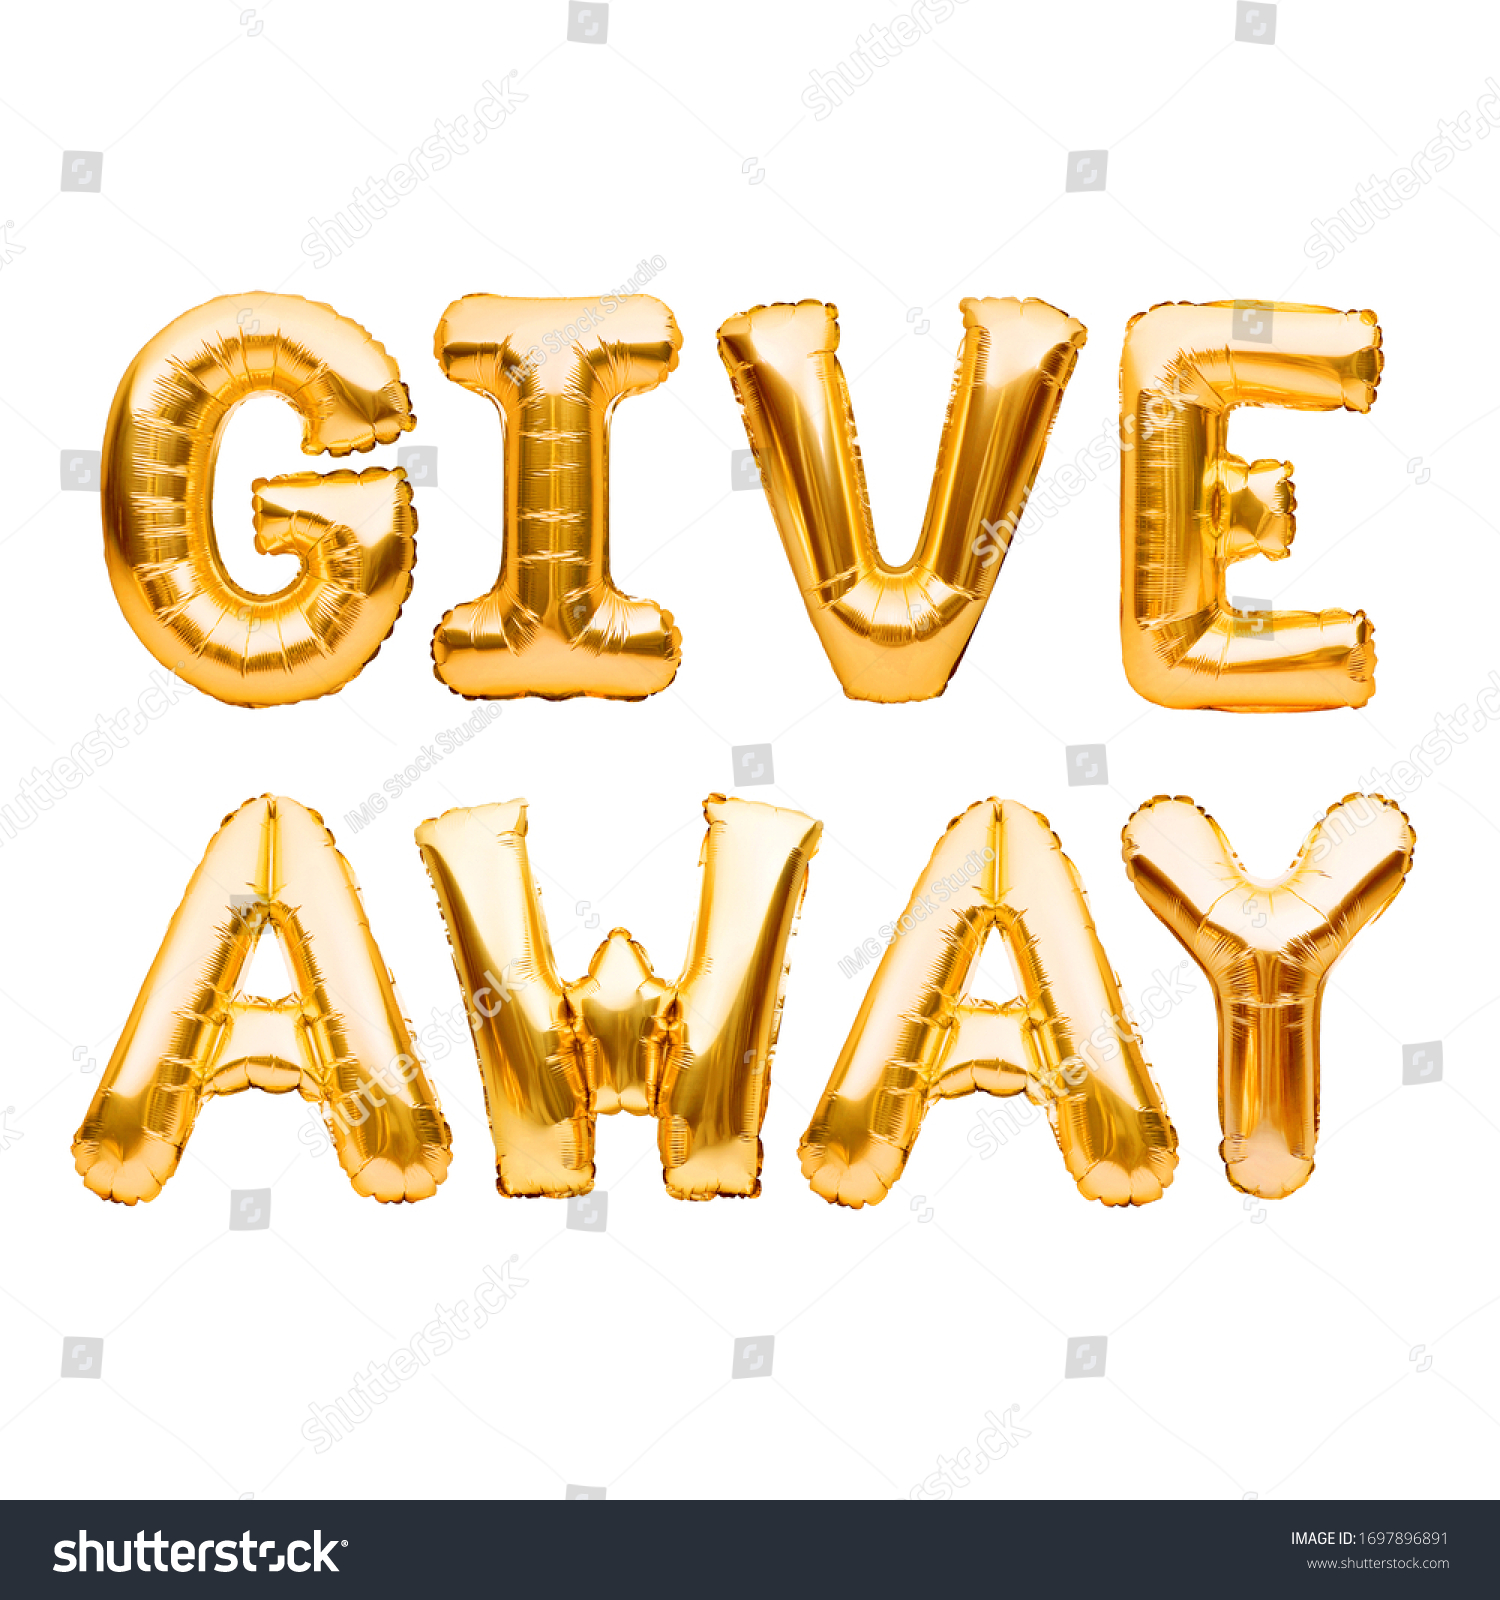 Golden word GIVEAWAY made of inflatable balloons isolated on white background. Lottery and prizes, contest. Social media marketing and advertising concept. Gold foil balloon letters. #1697896891